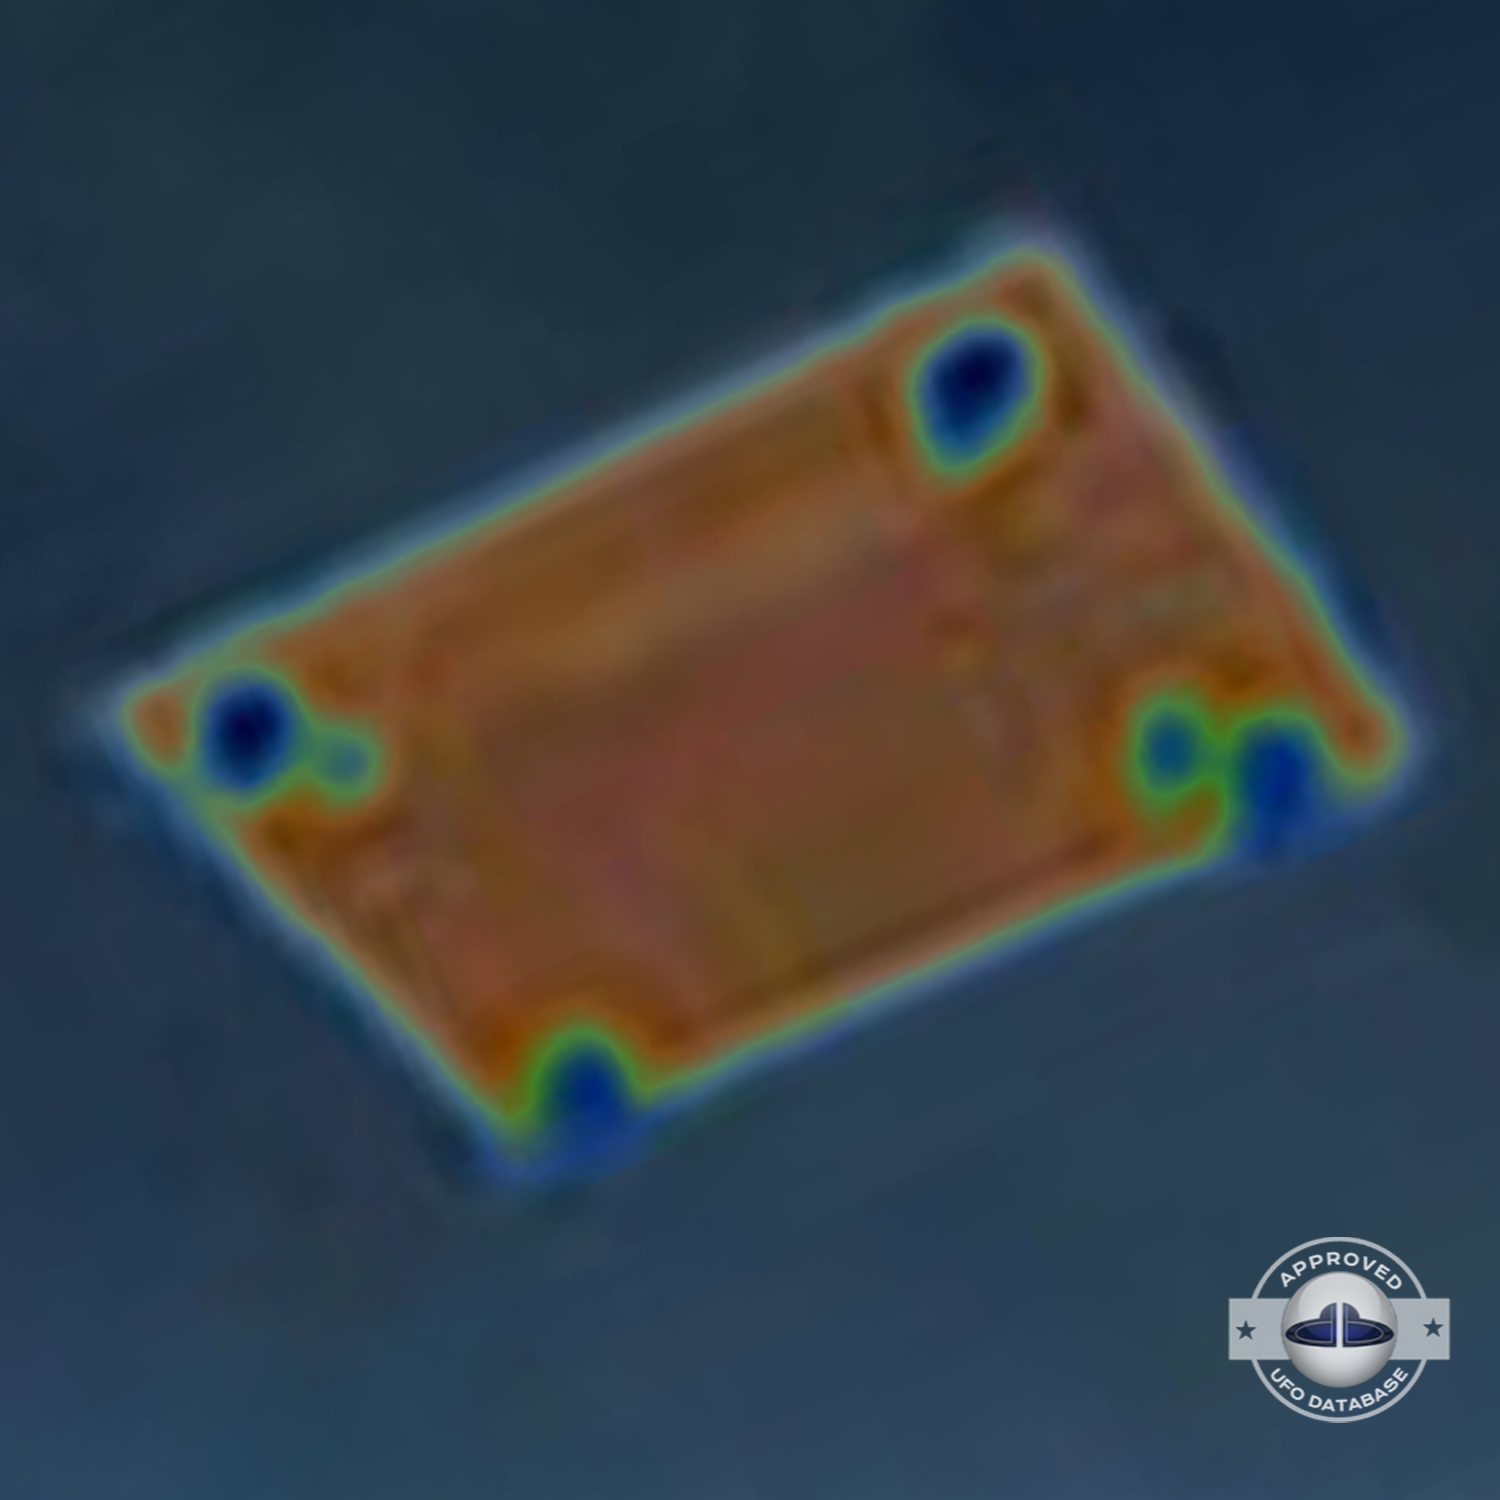 Incredible UFO picture showing a square shaped UFO Kanarraville USA UFO Picture #98-7